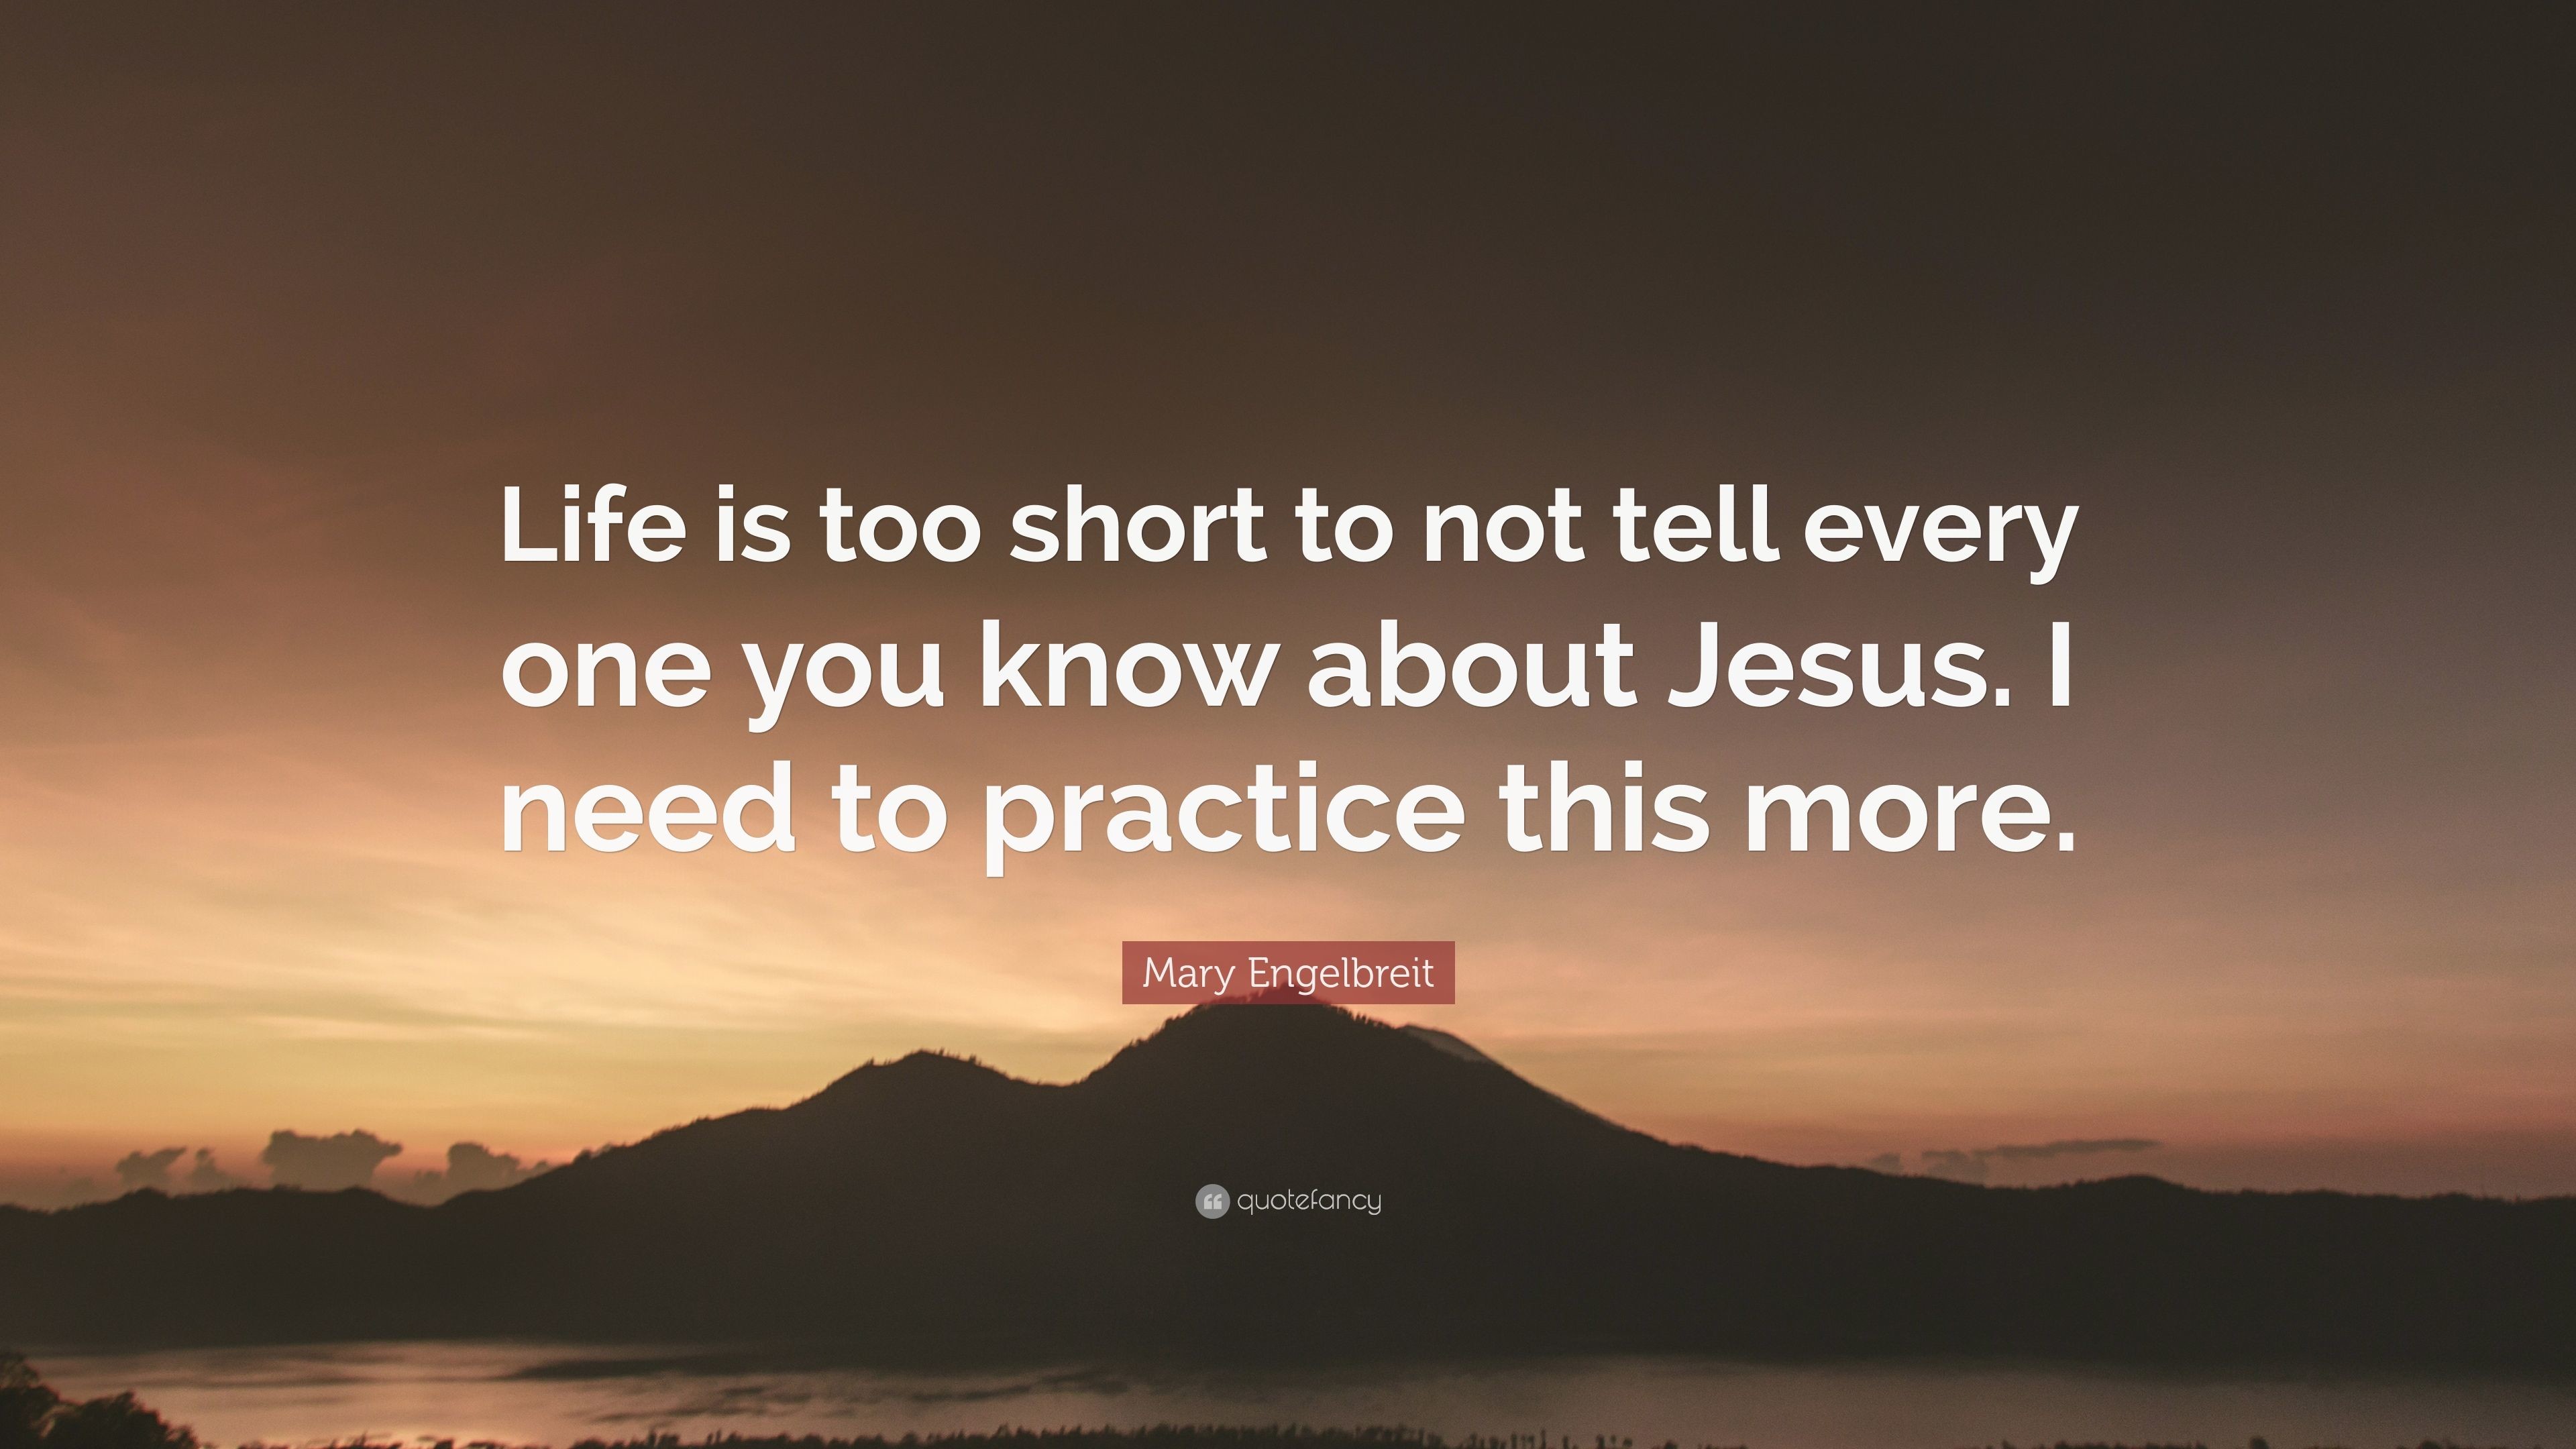 3840x2160 Mary Engelbreit Quote: “Life is too short to not tell every one you know